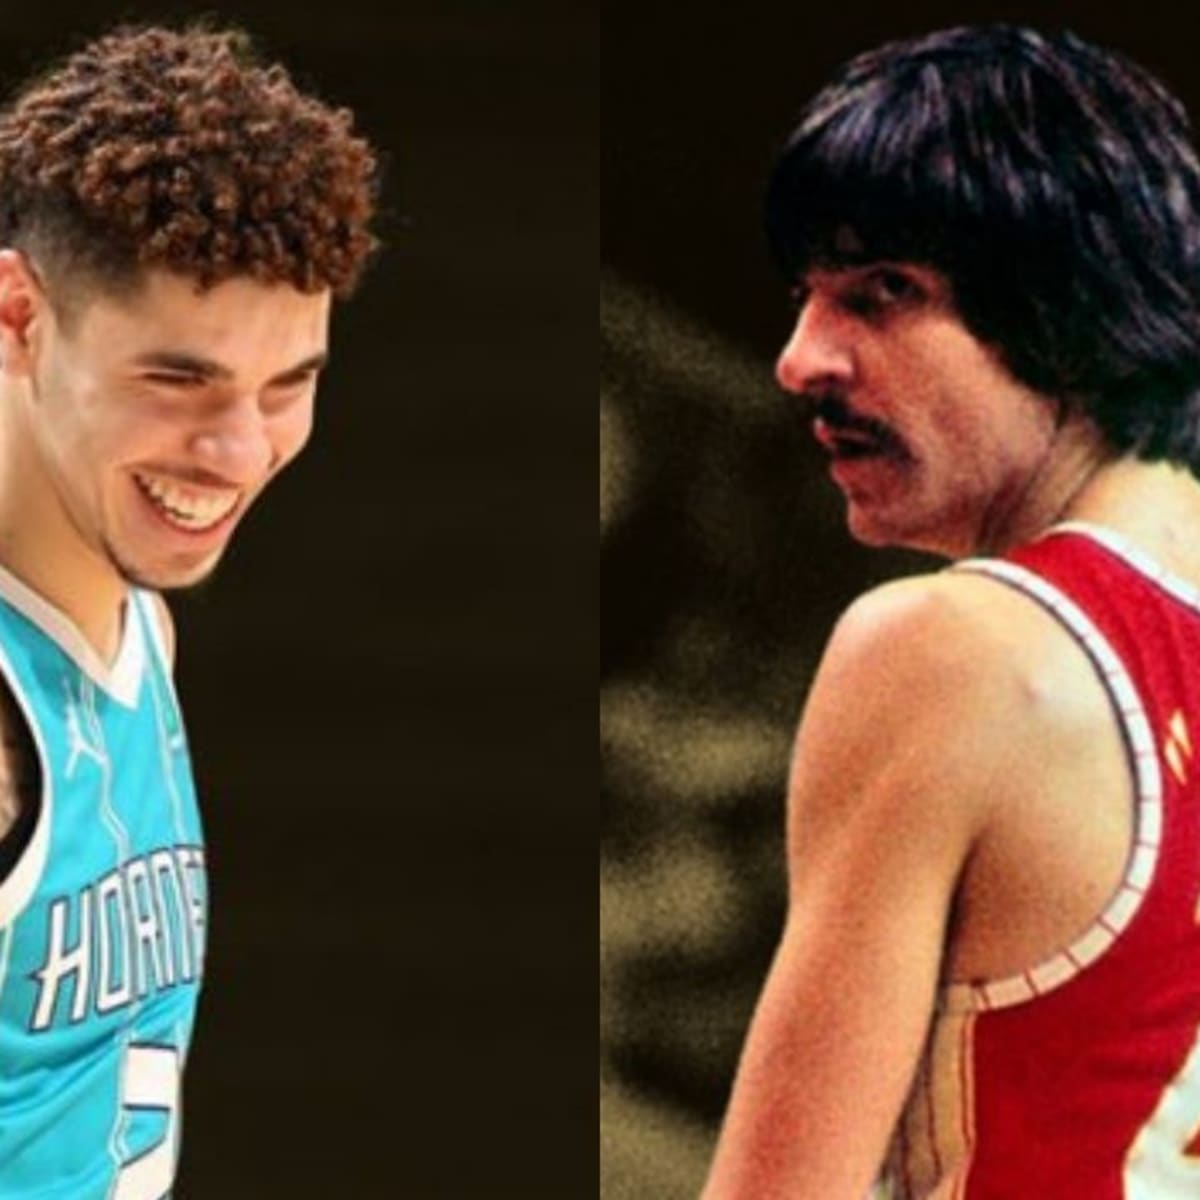 LaMelo Ball is the reincarnation of Pistol Pete Maravich according to